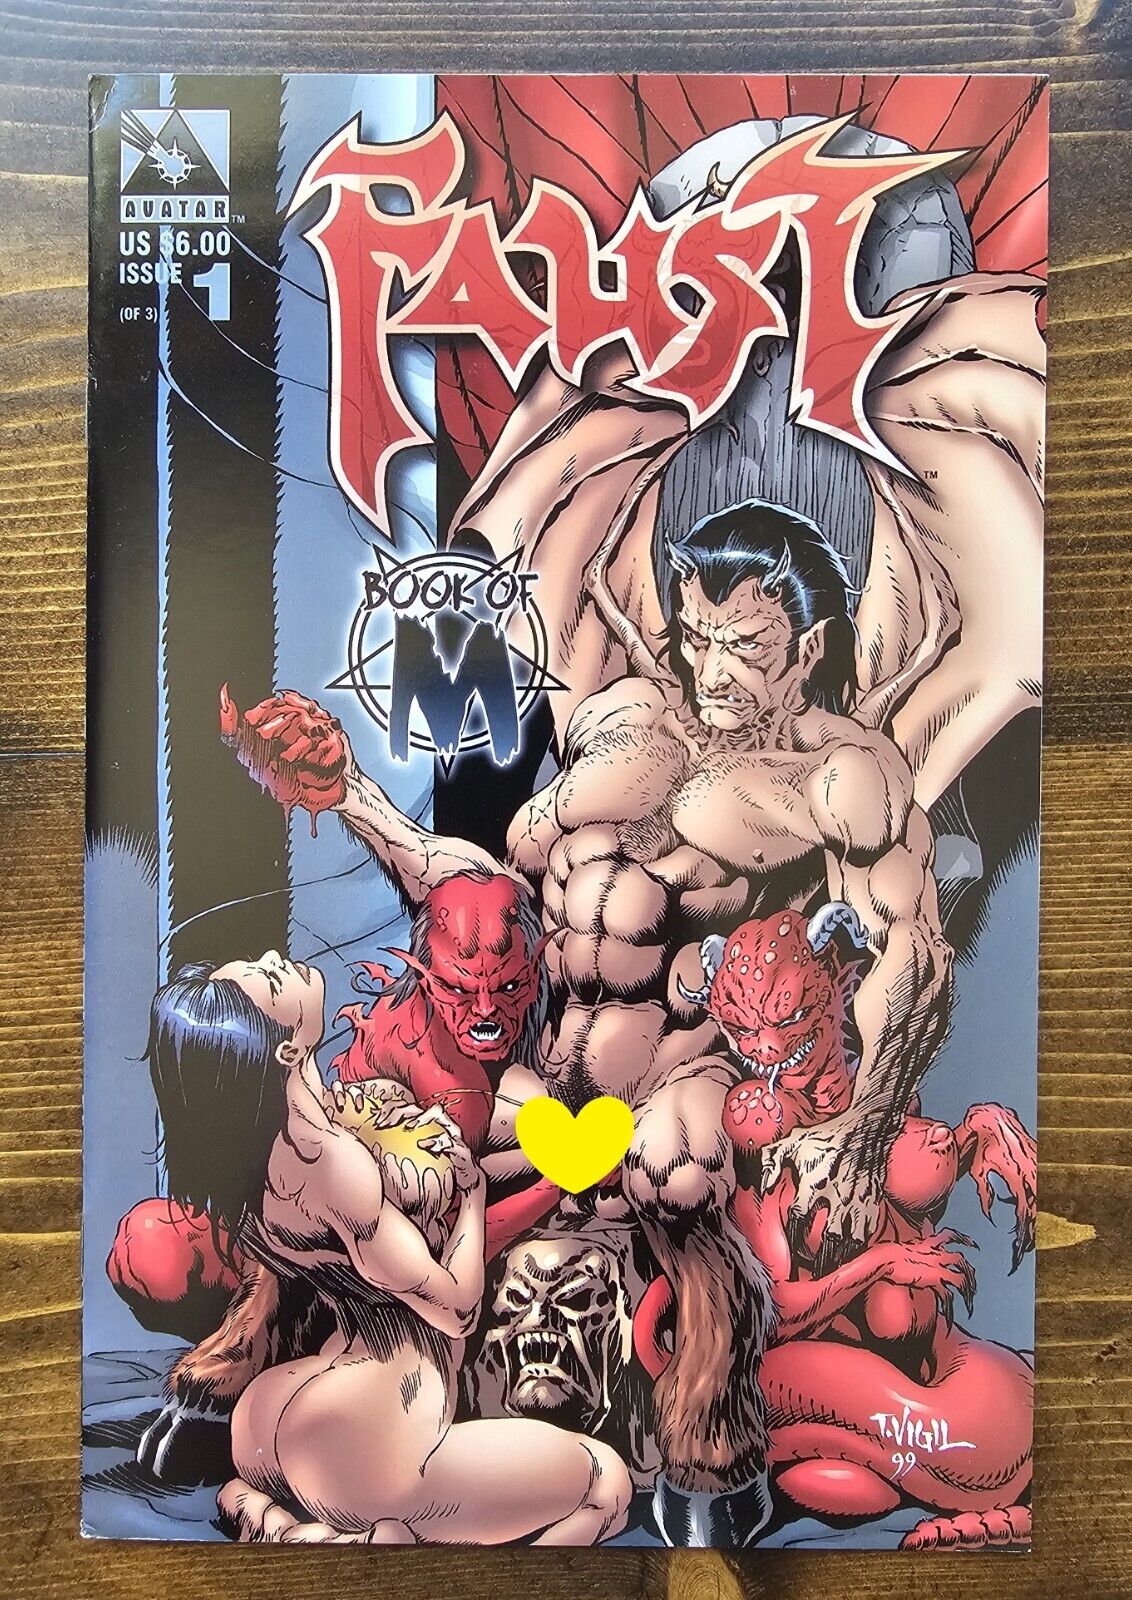 Faust Book of M #1 - EXTREME GRAPHIC COVER VARIANT - Tim Vigil